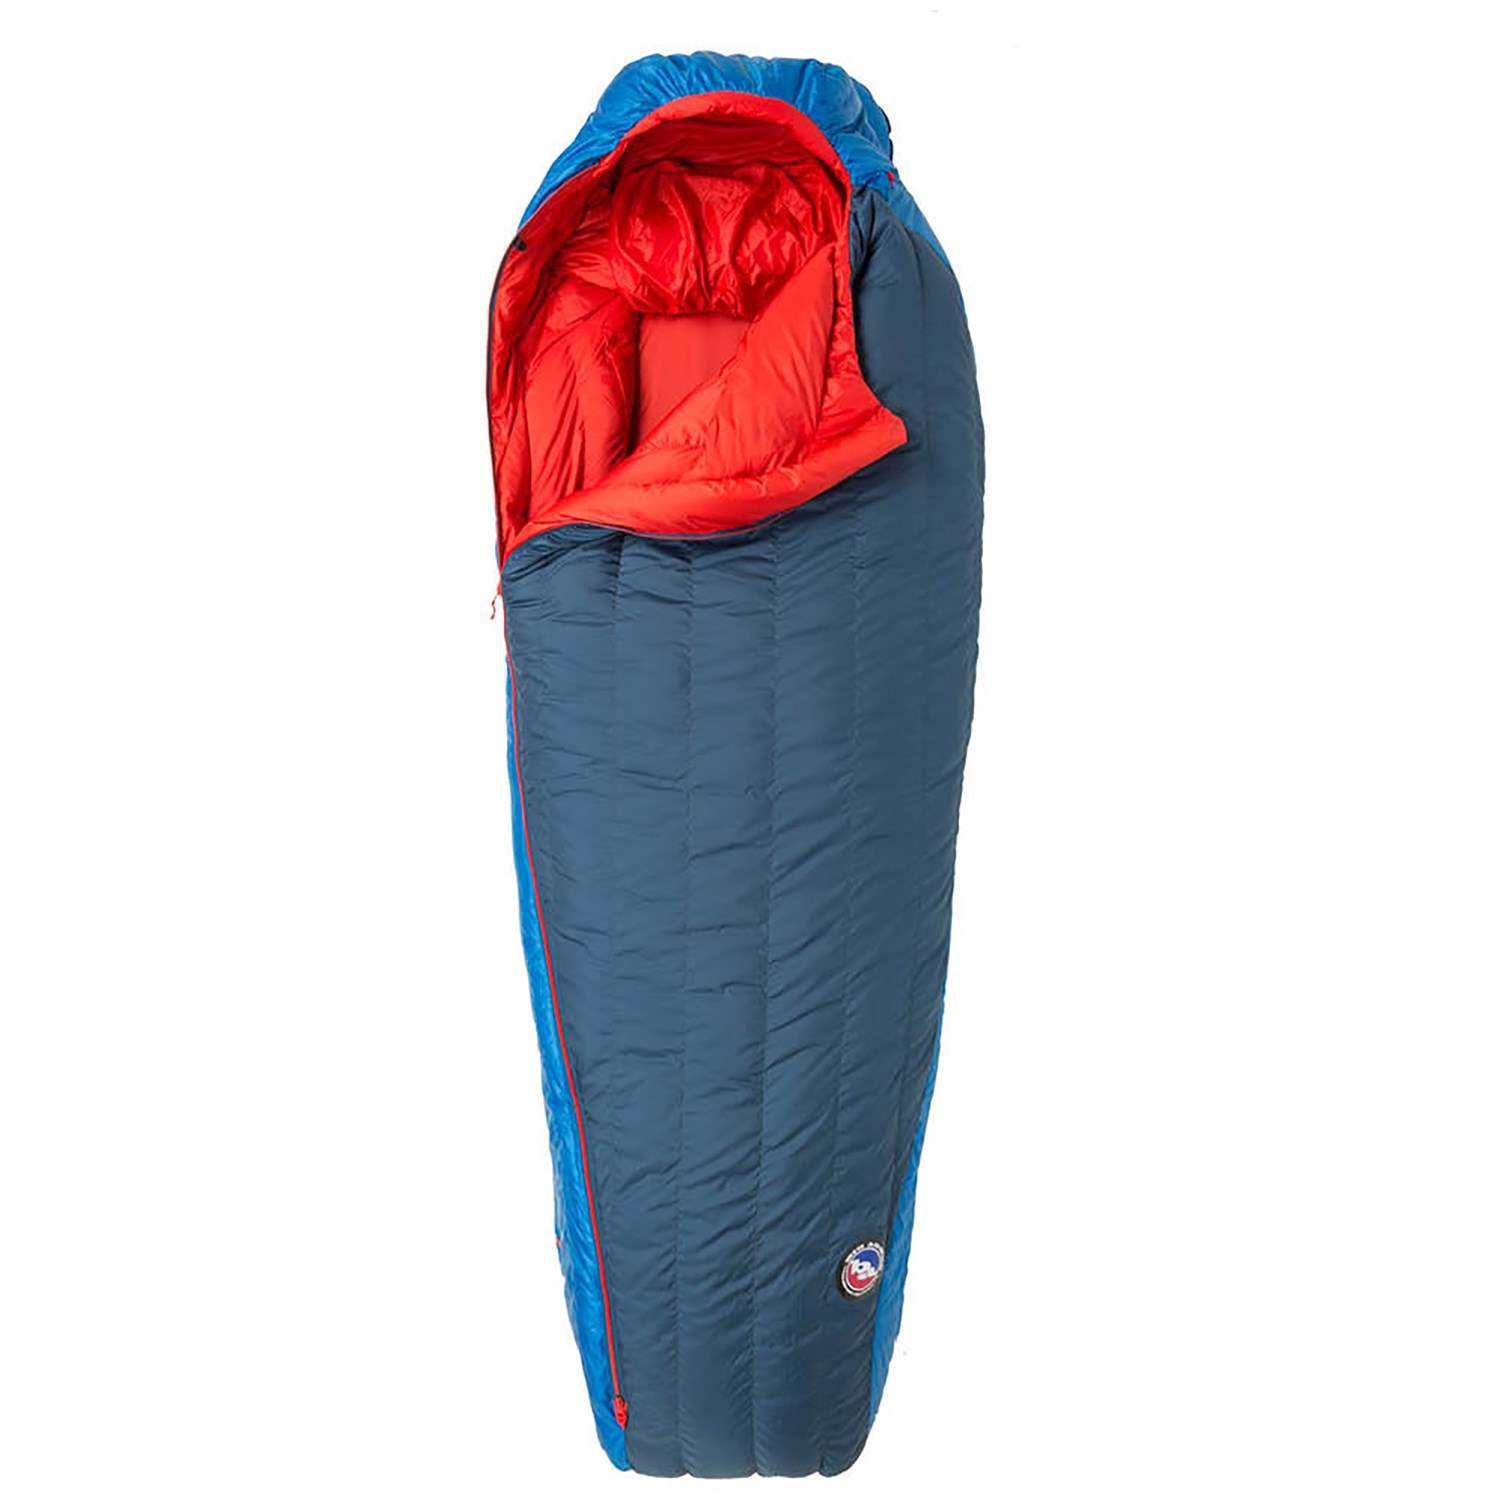 Big Agnes Double Sleeping Pad Bag Review Cuddling in the Backcountry   GearJunkie